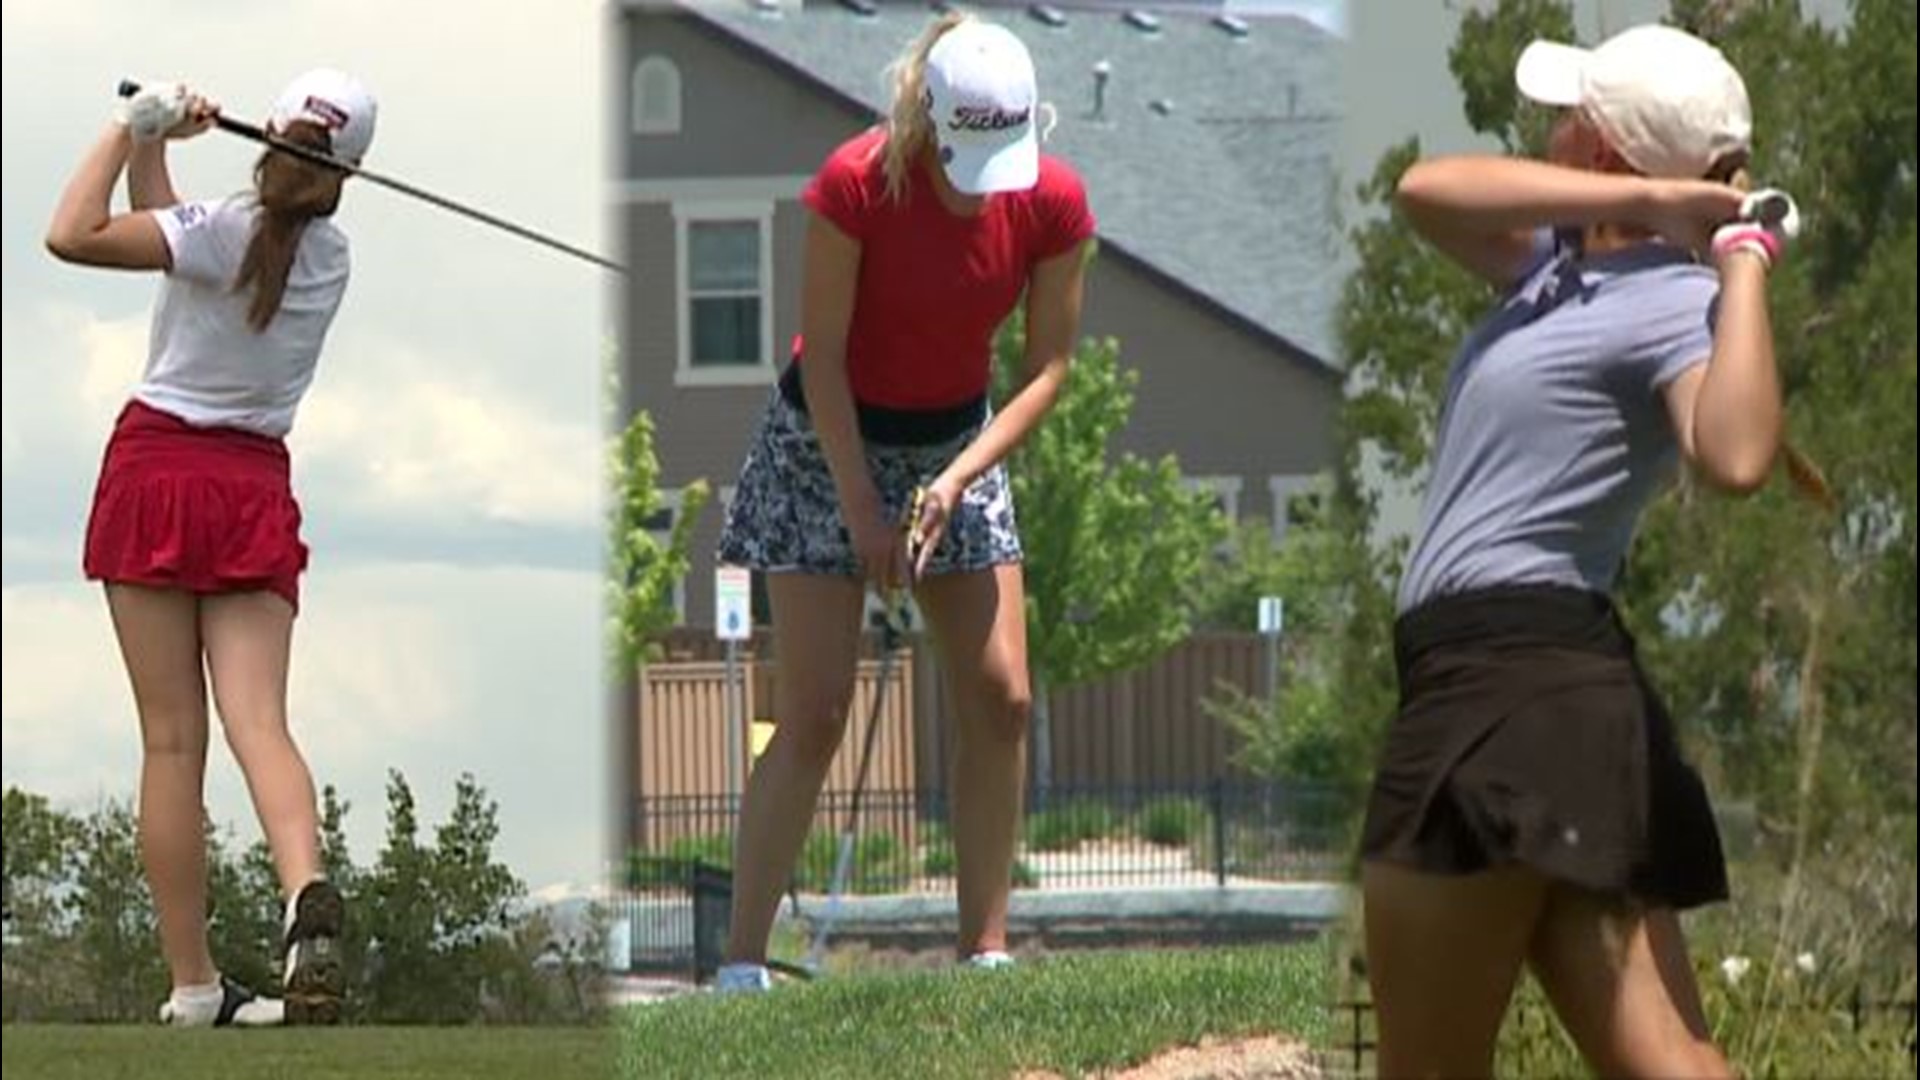 Three high school golfers played in their first tournament post-pandemic and had the opportunity to tee off with LPGA greats Jennifer Kupcho and Carlota Ciganda.